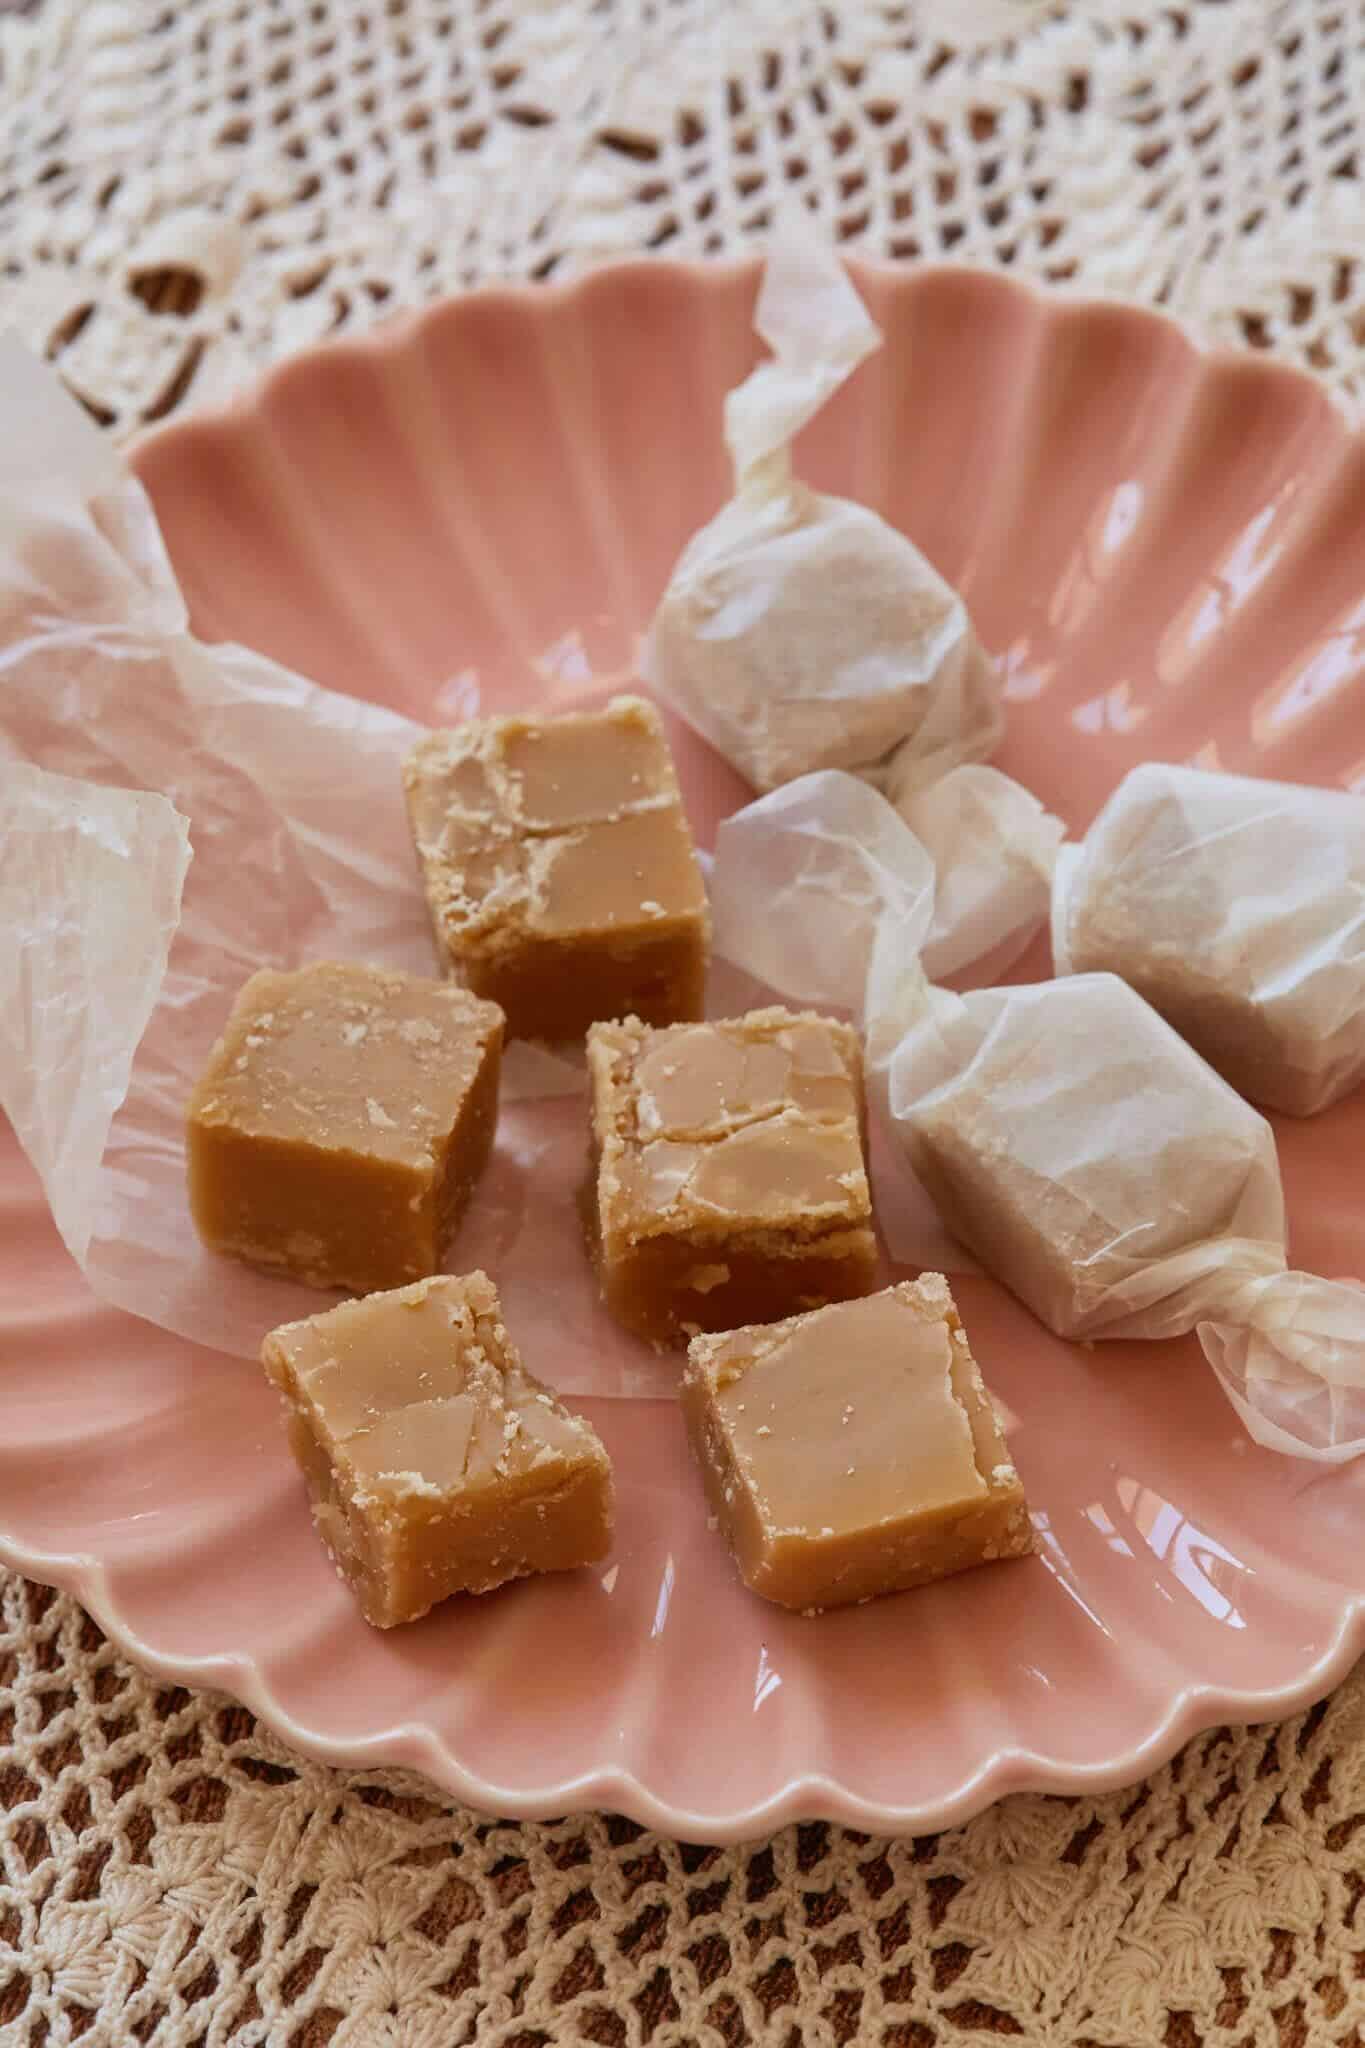 Square homemade candy made with maple syrup are served on a pink dish. The homemade candy has a slightly gritty texture from the sugar crystals and is wrapped in parchment paper. Using only 3 ingredients makes it the magic of Fall Recipes.